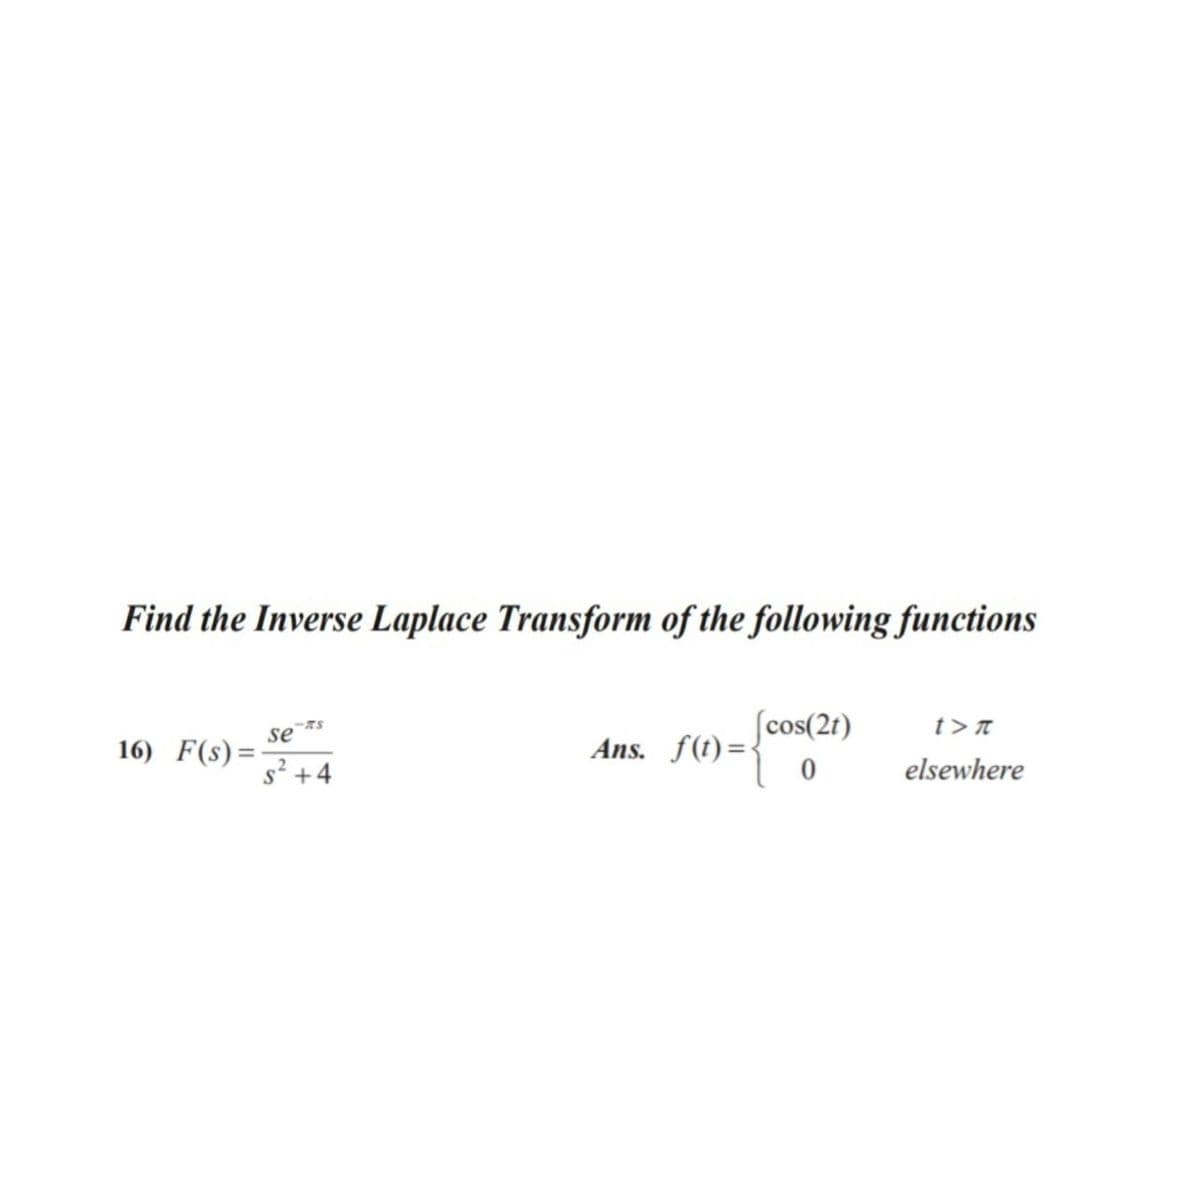 Find the Inverse Laplace Transform of the following functions
(cos(2t)
t >n
se
16) F(s)=-
s? +4
Ans. f(t)=-
elsewhere
